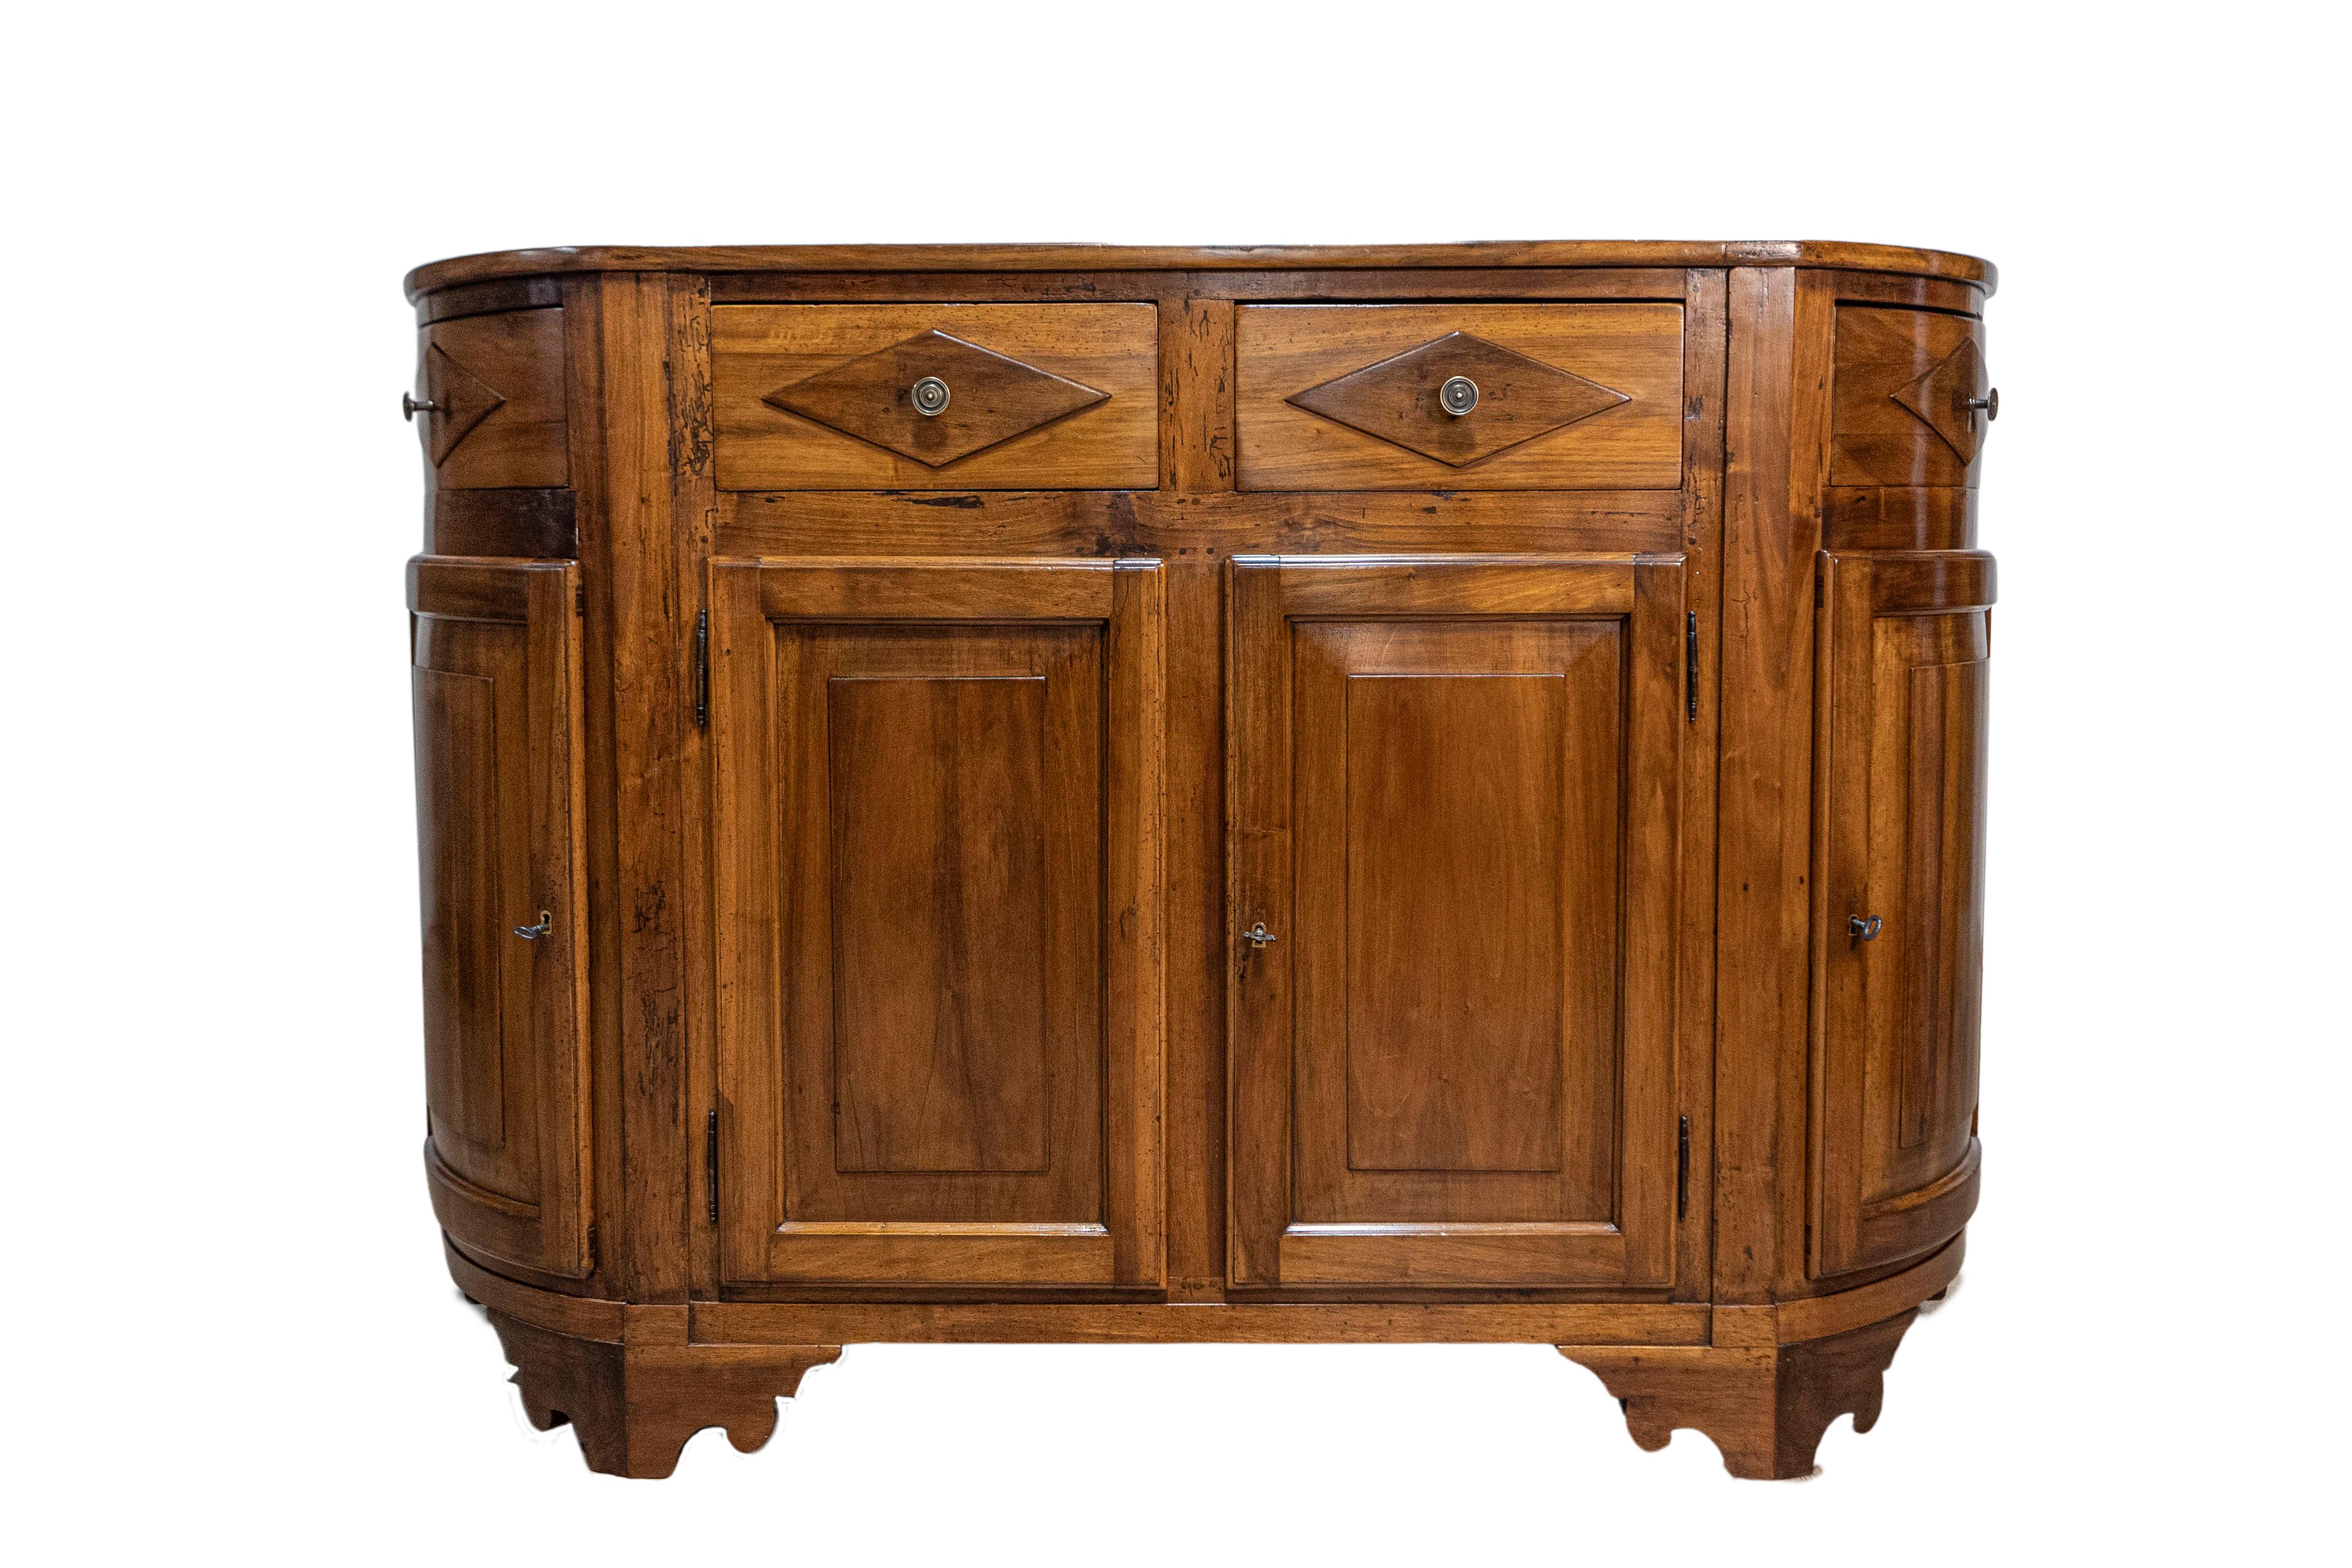 An Italian walnut credenza from the 19th century with four drawers over four doors, diamond motifs and rounded sides. This stunning 19th-century Italian walnut credenza is a magnificent example of classic craftsmanship combined with functional